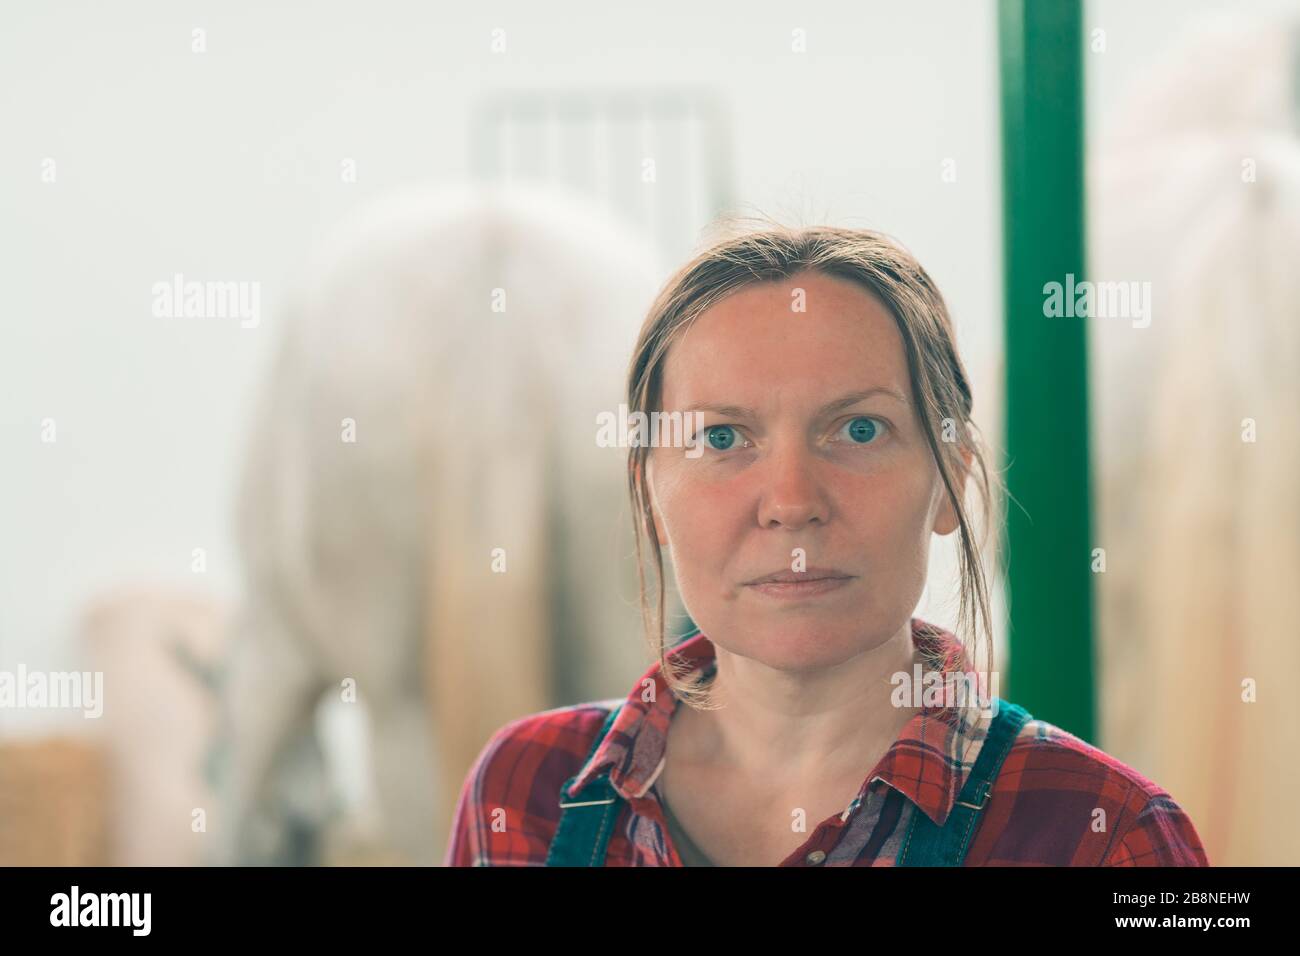 Portrait of female rancher at horse stable looking at camera. Adult woman wearing plaid shirt and jeans bib overalls as farm worker. Stock Photo